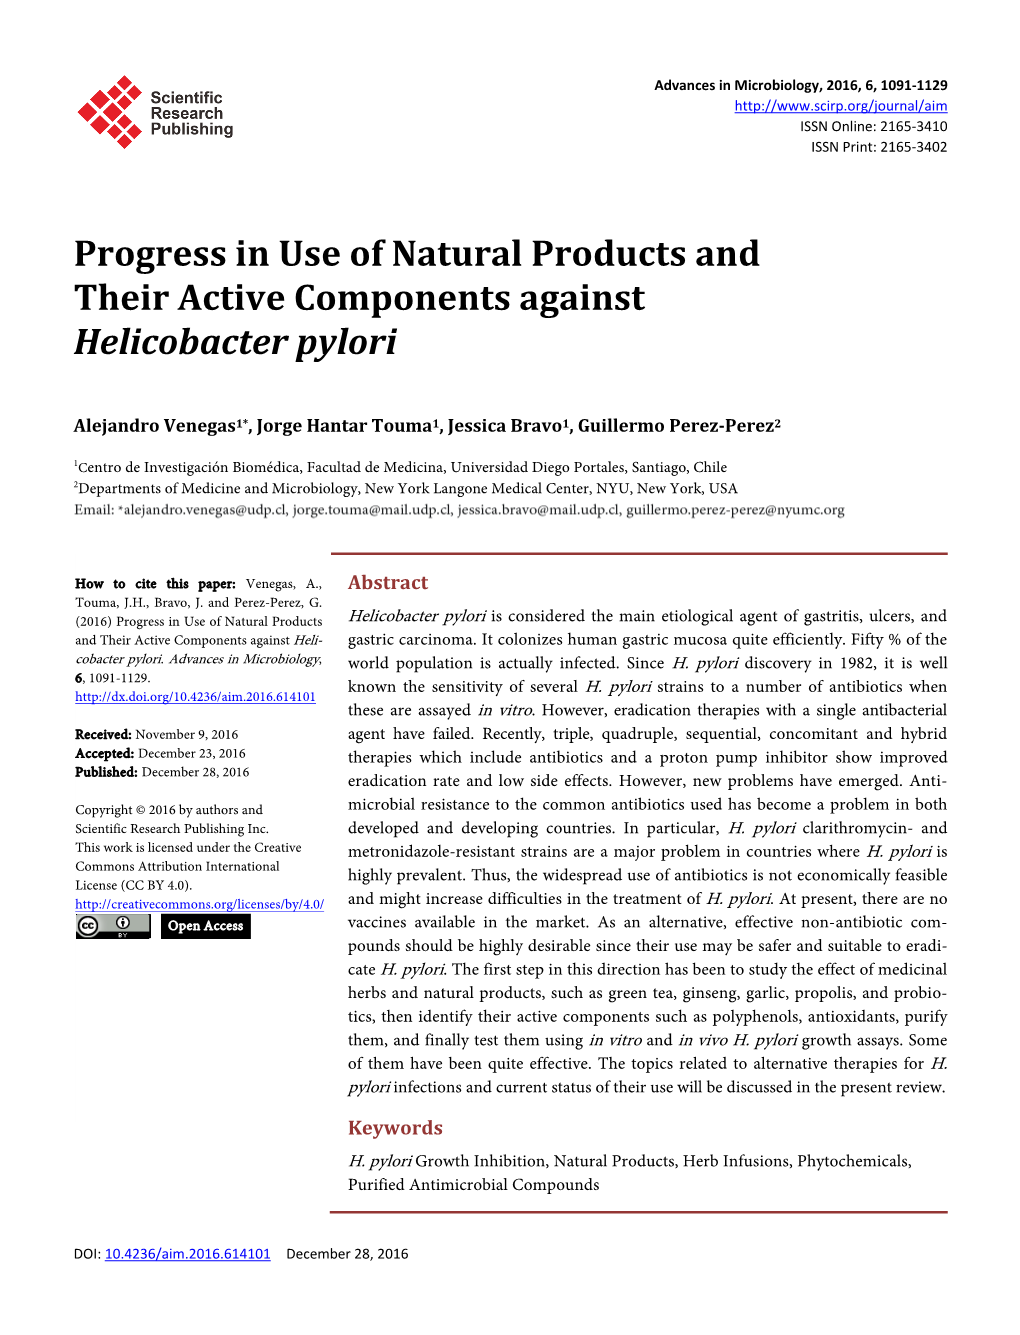 Progress in Use of Natural Products and Their Active Components Against Helicobacter Pylori